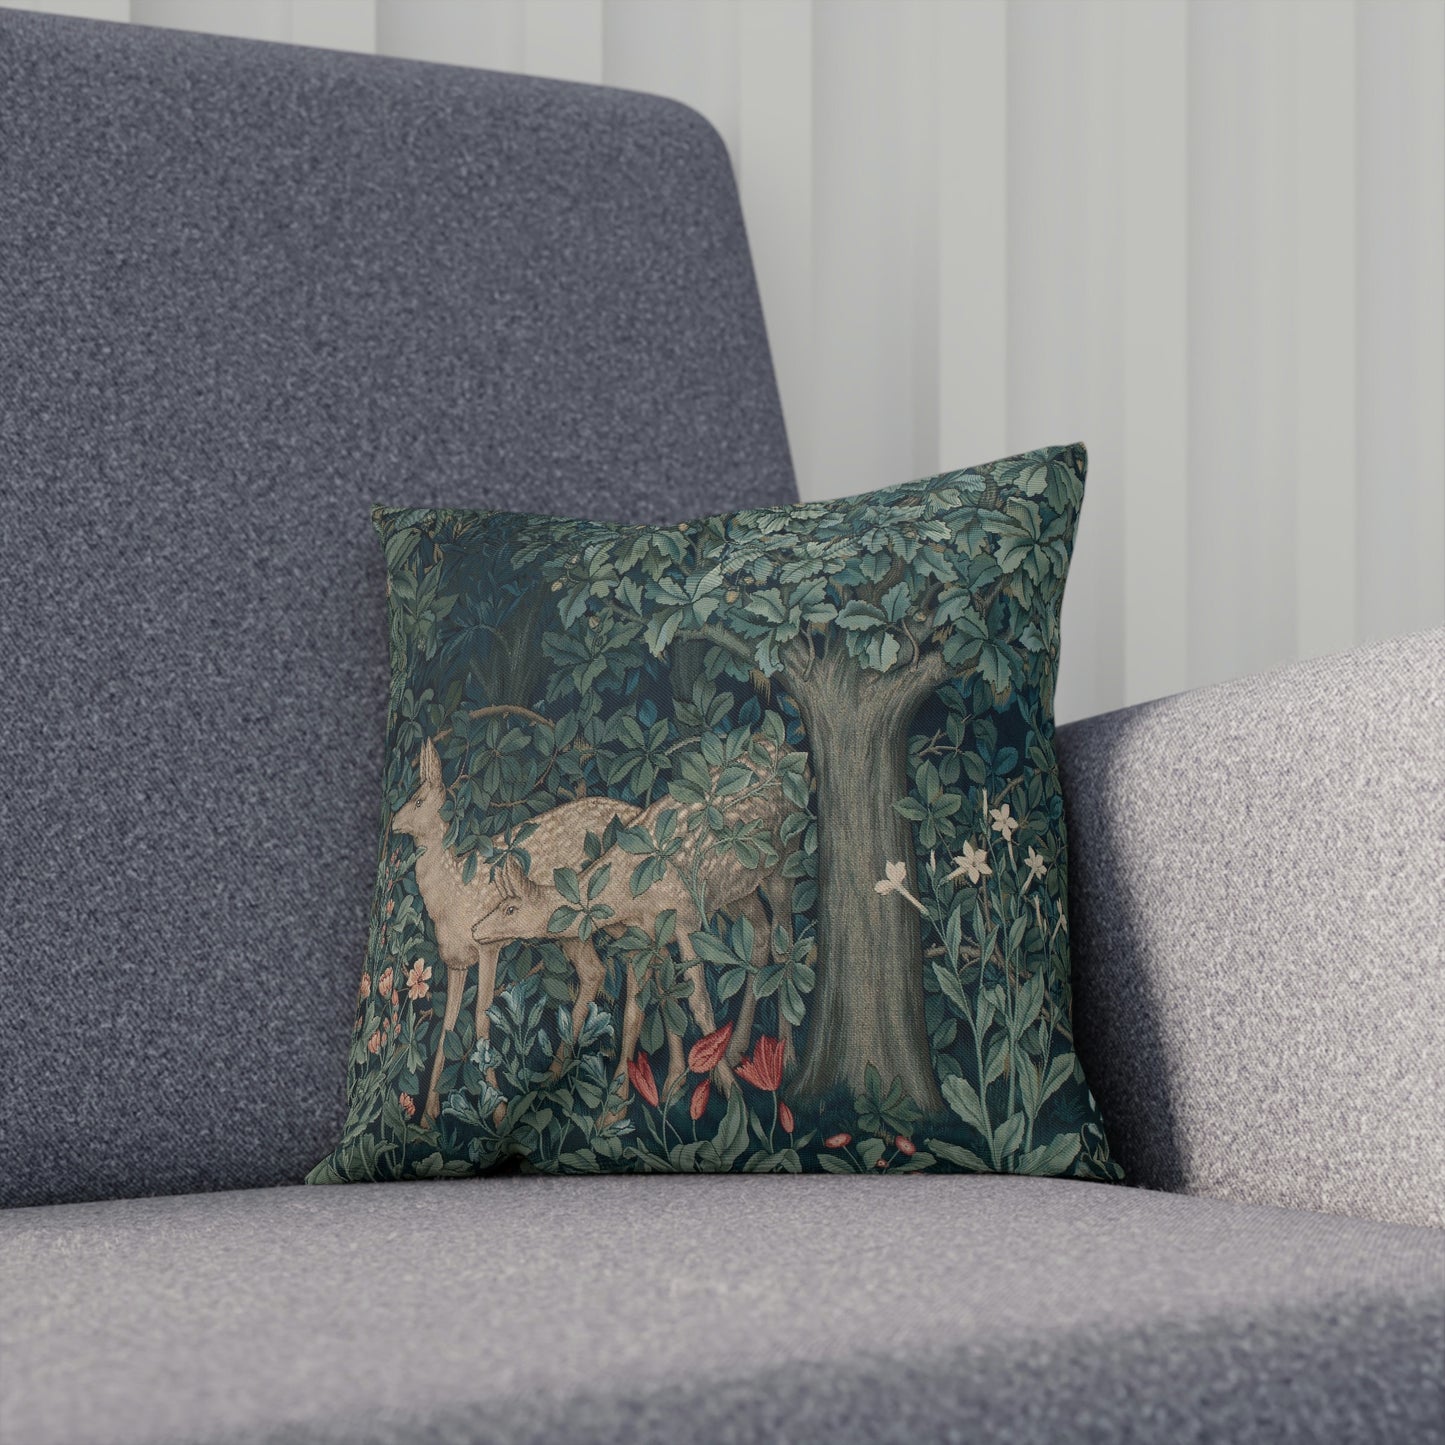 William-Morris-and-Co-Cushion-and-Cushion-Cover-Dear-by-John-Henry-Dearle-Green-Forest-Collection-10